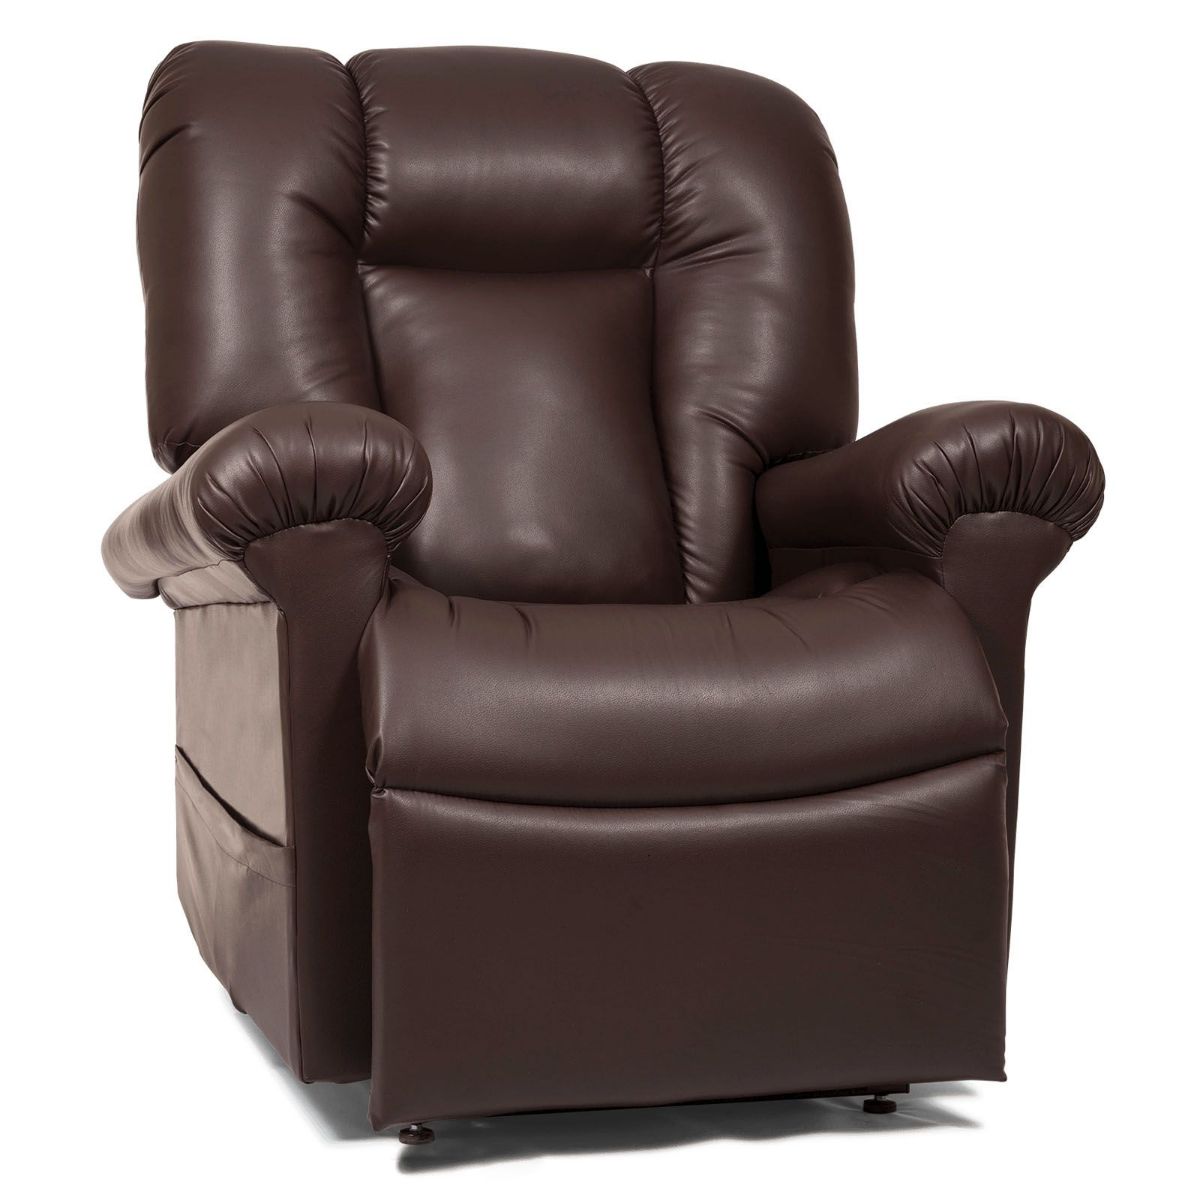 Picture of Artemis Brisa Coffee Lift Chair